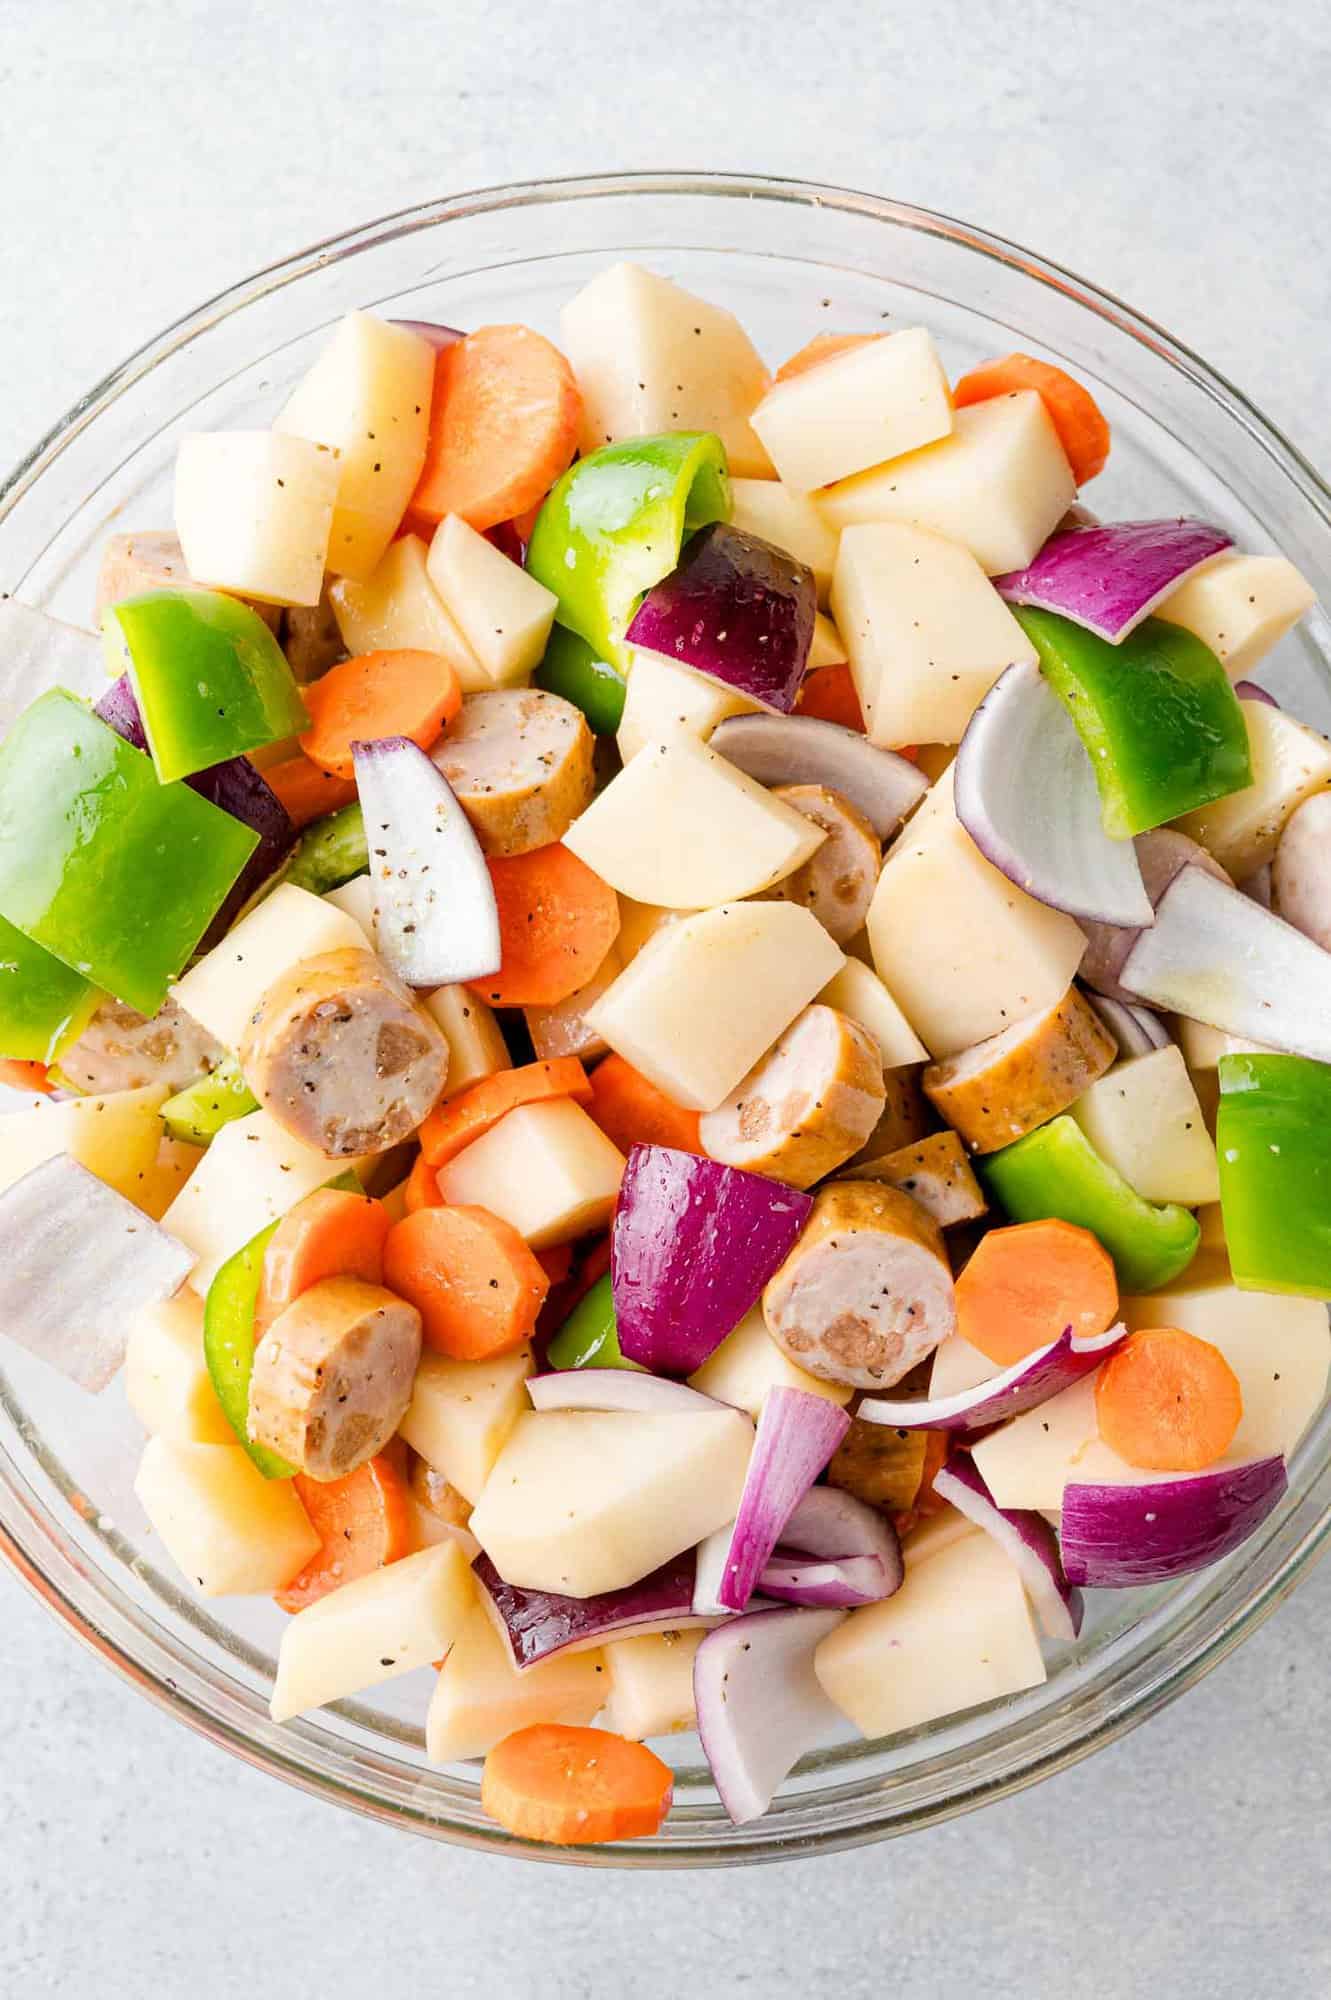 Sliced chicken sausage mixed with uncooked vegetables and potatoes.